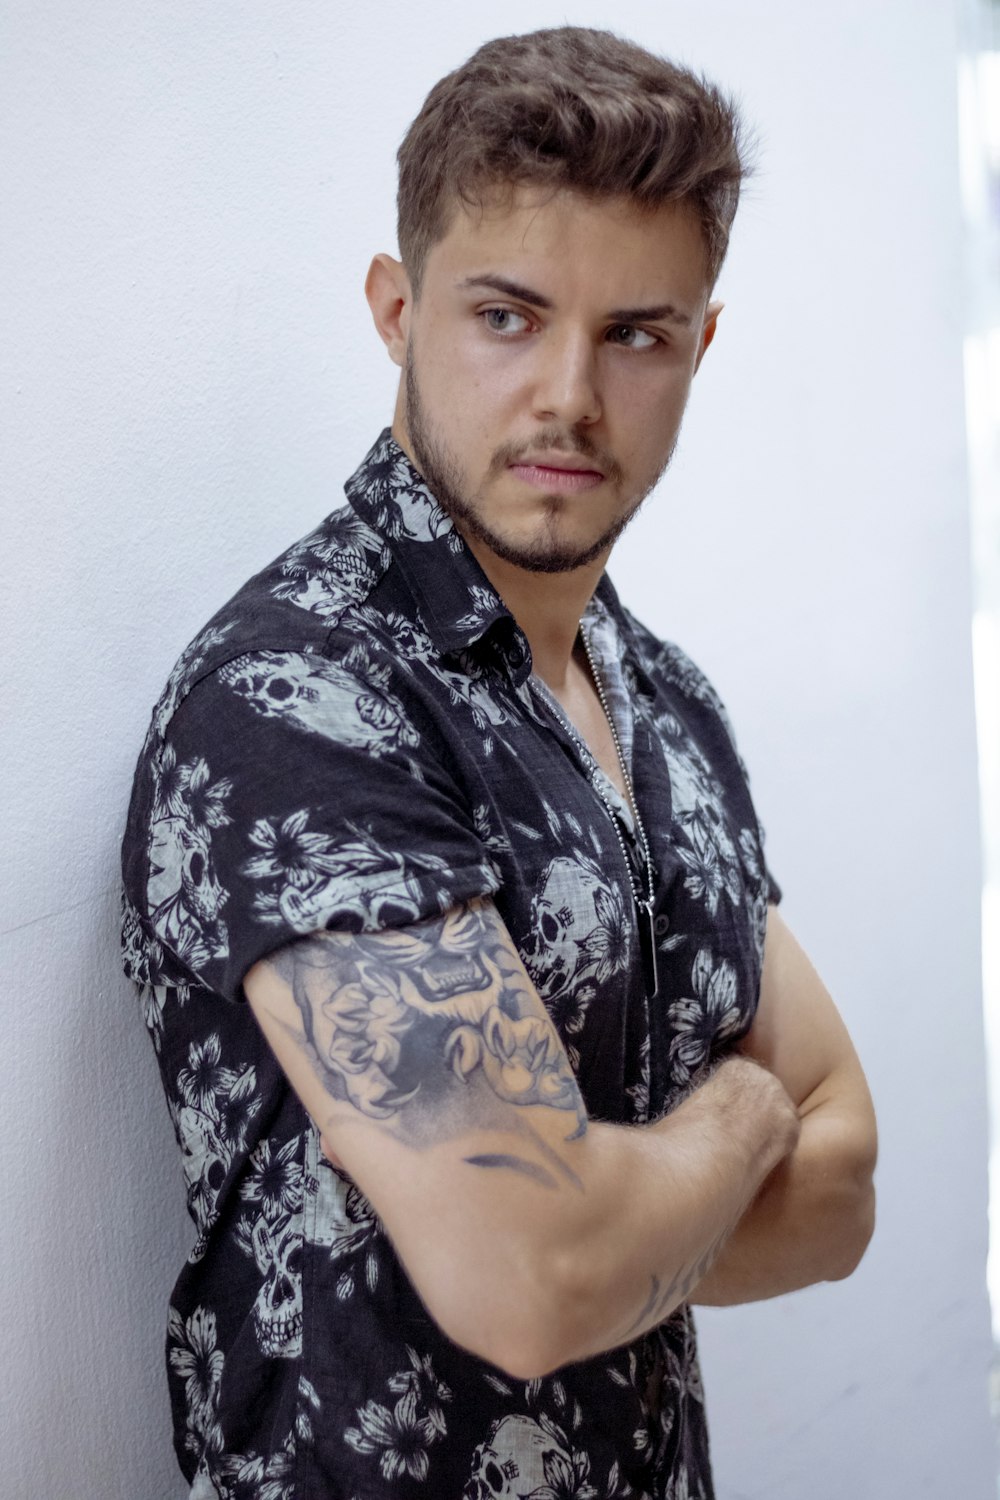 a man with a tattoo on his arm leaning against a wall